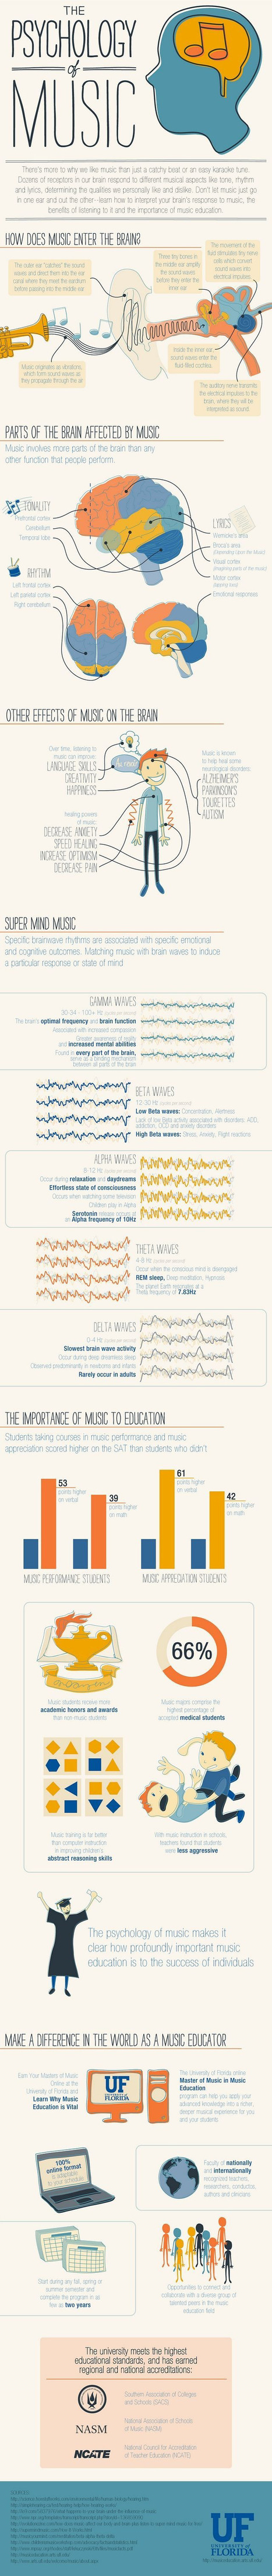 A Wonderful Graphic Featuring The Importance of Music in Education [Infographic] | Didactics and Technology in Education | Scoop.it